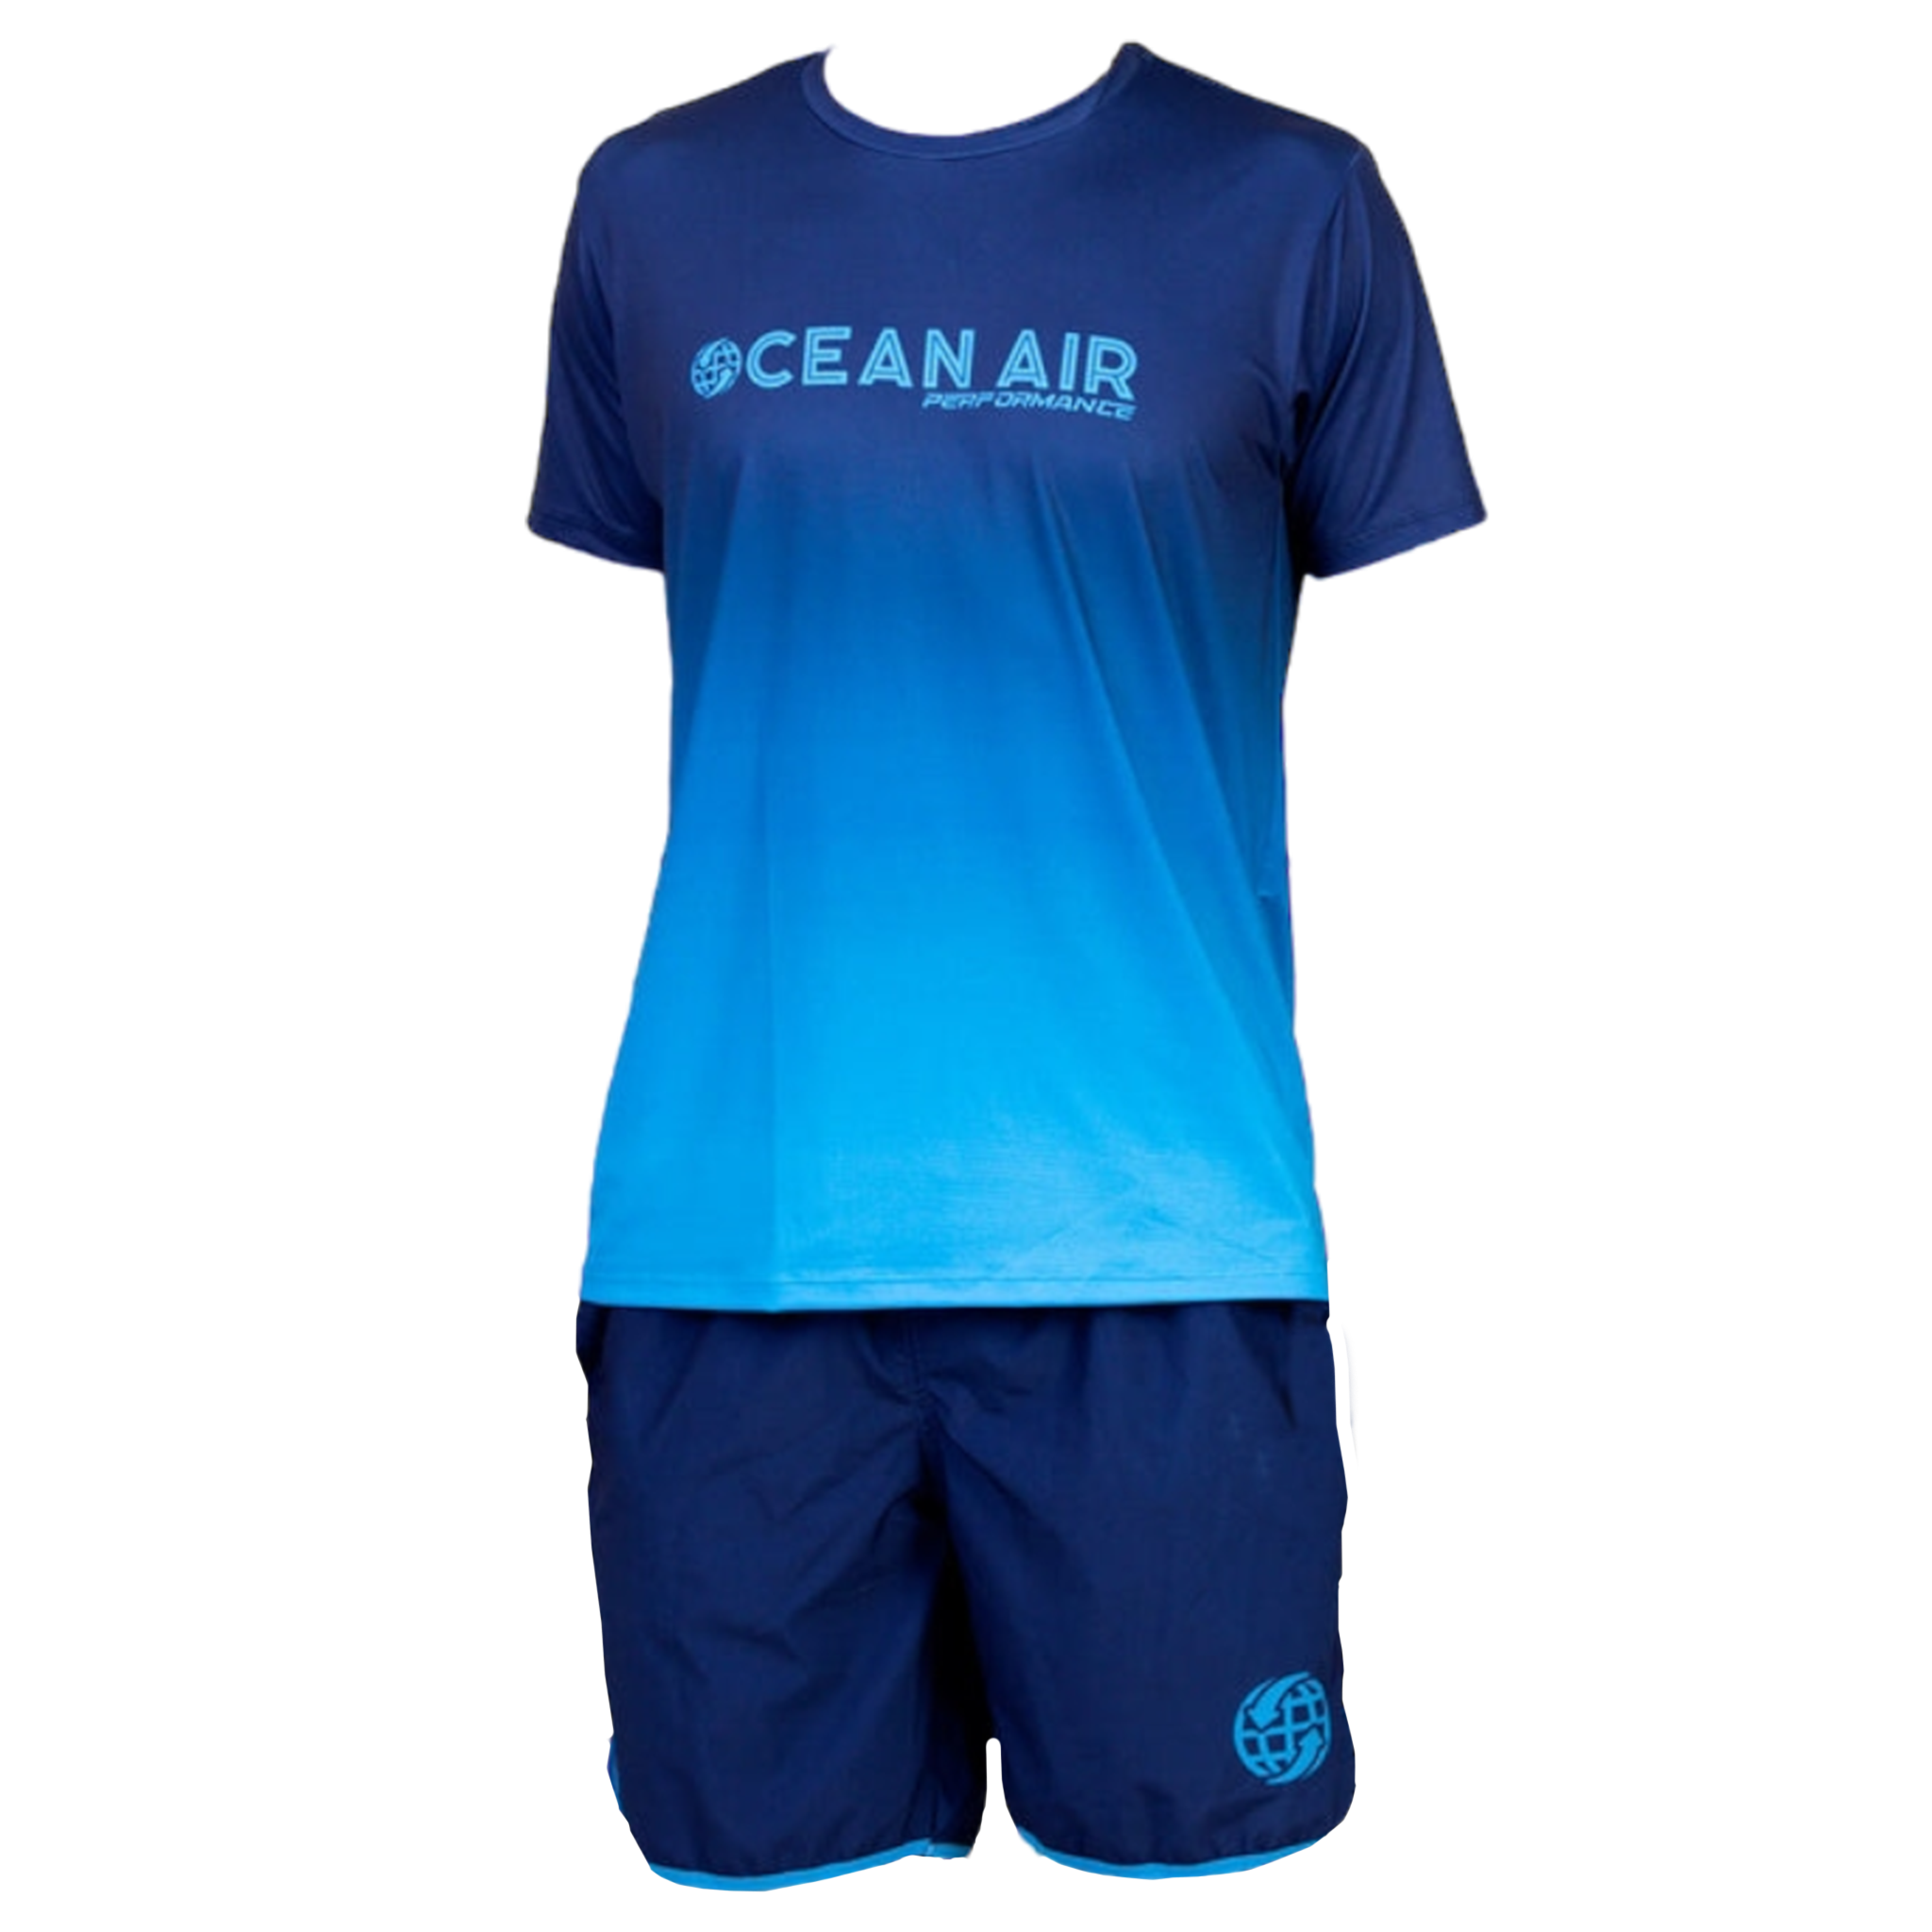 Ocean Air Ombre Set Fall Colletion - Royal Blue